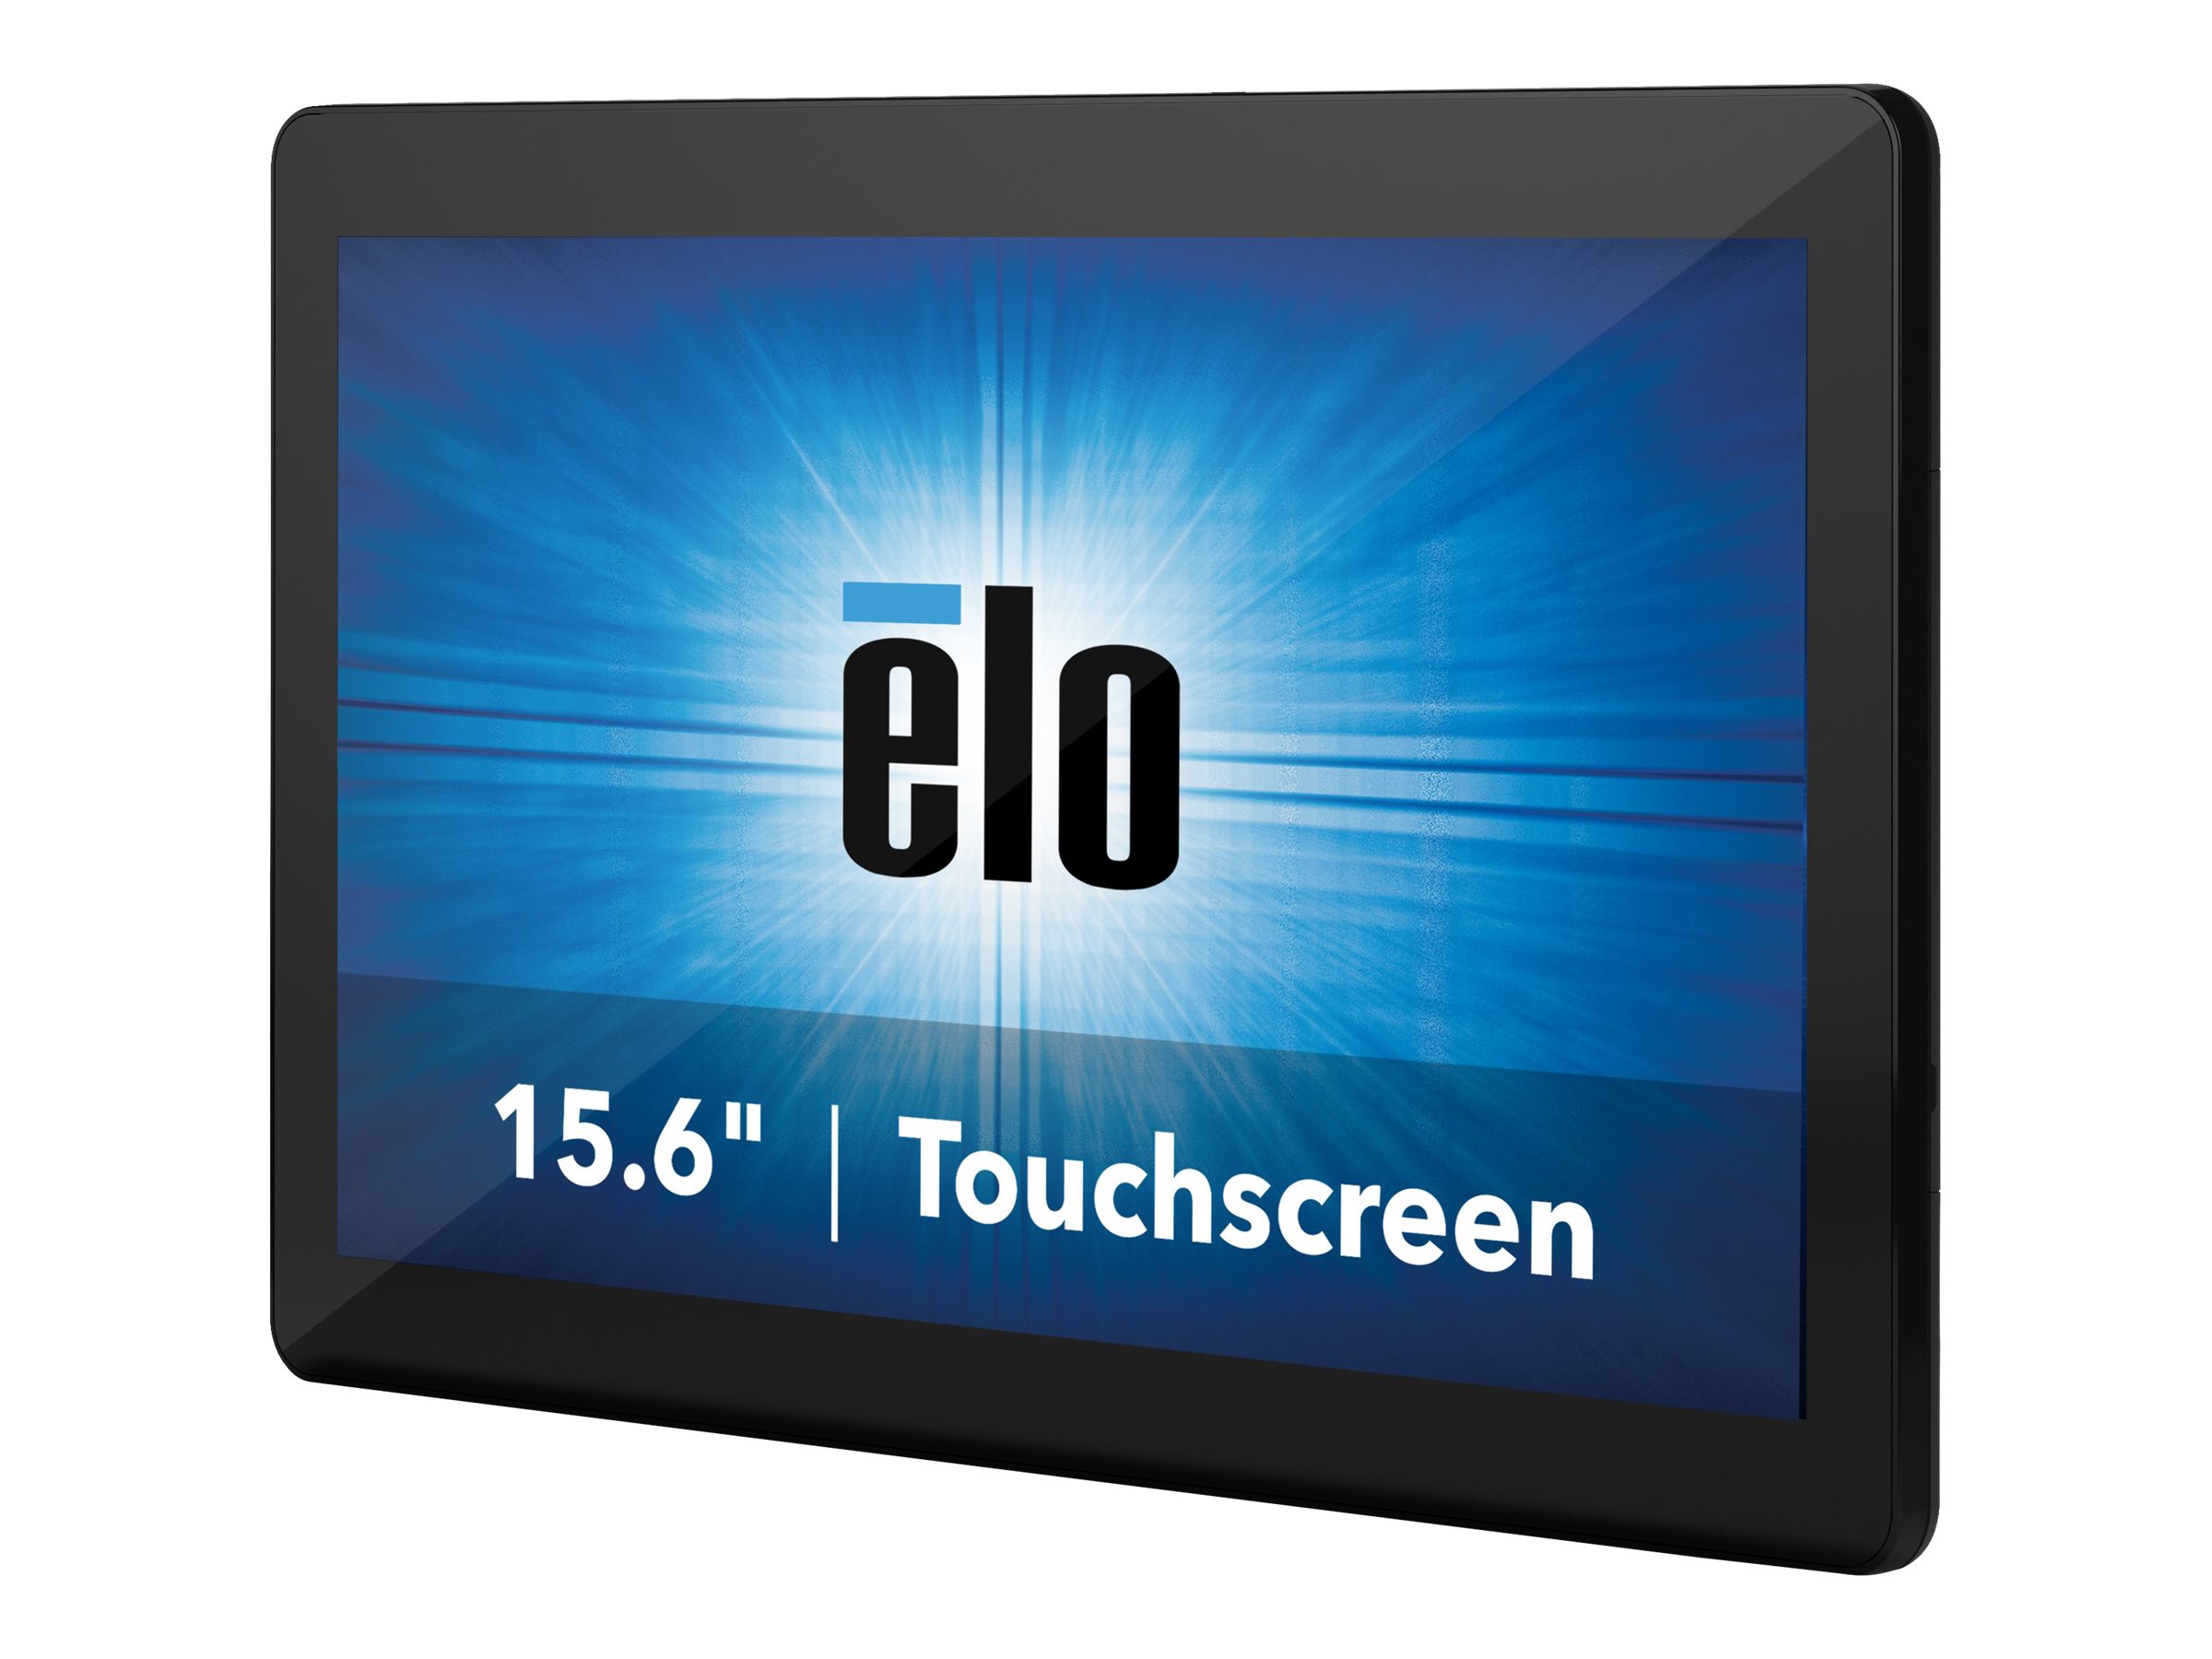 Elo Touch Solutions Elo I-Series 2.0 - All-in-One (Komplettlösung) - Core i5 8500T / 2.1 GHz - vPro - RAM 8 GB - SSD 128 GB - UHD Graphics 630 - GigE - WLAN: 802.11a/b/g/n/ac, Bluetooth 5.0 - Windows 10 - Monitor: LED 39.6 cm (15.6")